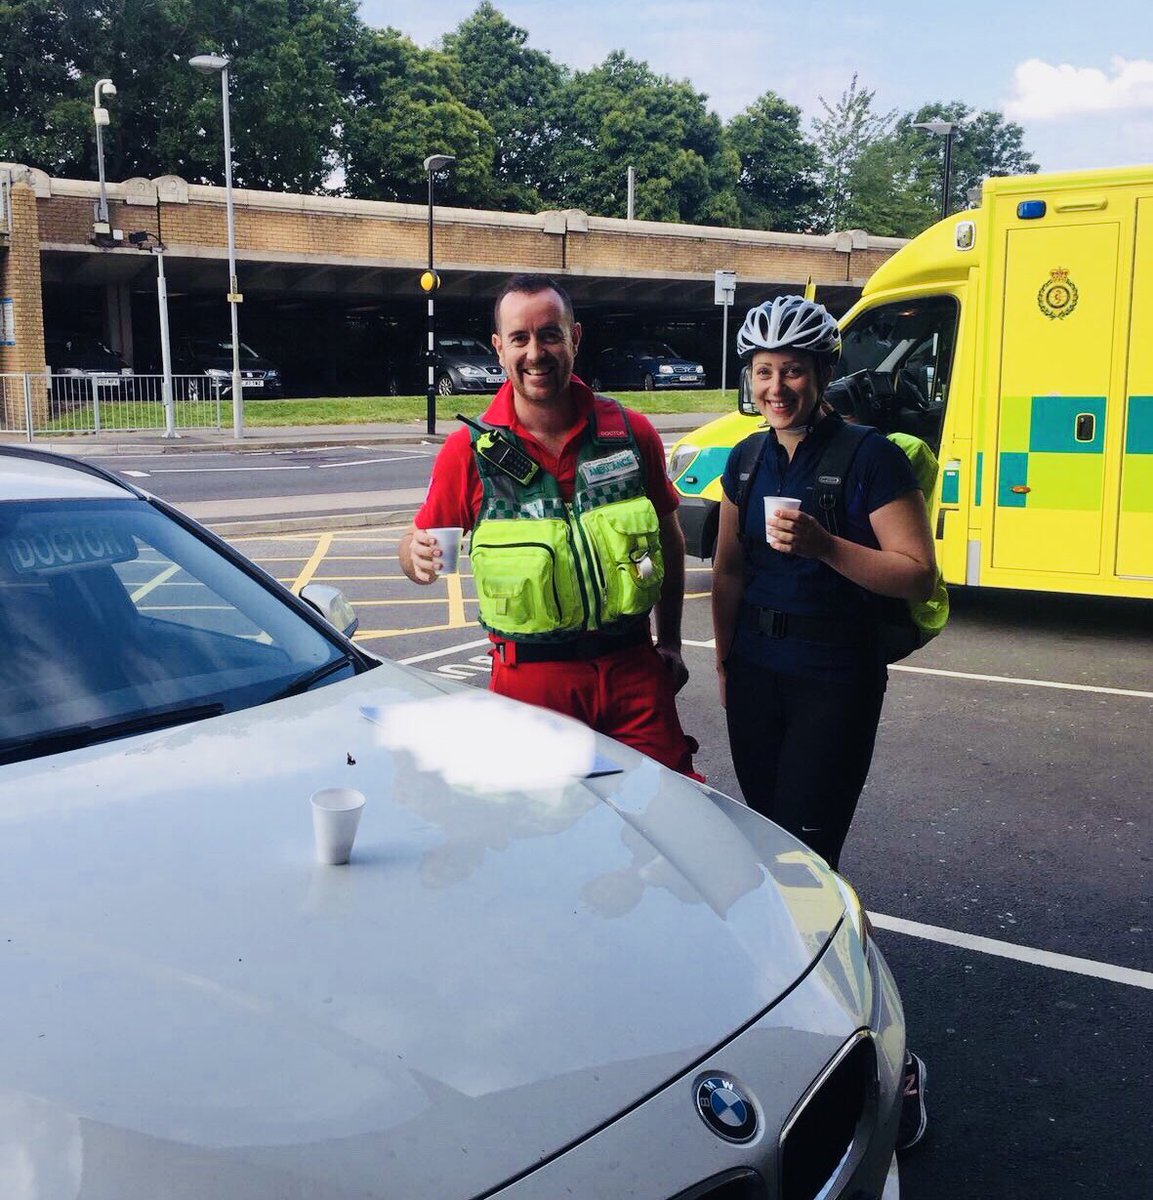 CPR Saves lives.

In one of our many responses over the last week, @BASICS_HQ #VolunteerMedic @DoctorBigG provided #EnhancedCare & worked with members of the public, @WelshAmbulance & passing @CAVUHB @Welshanaesthes Doc to save life. 
#ROSC
#ChainOfSurvival